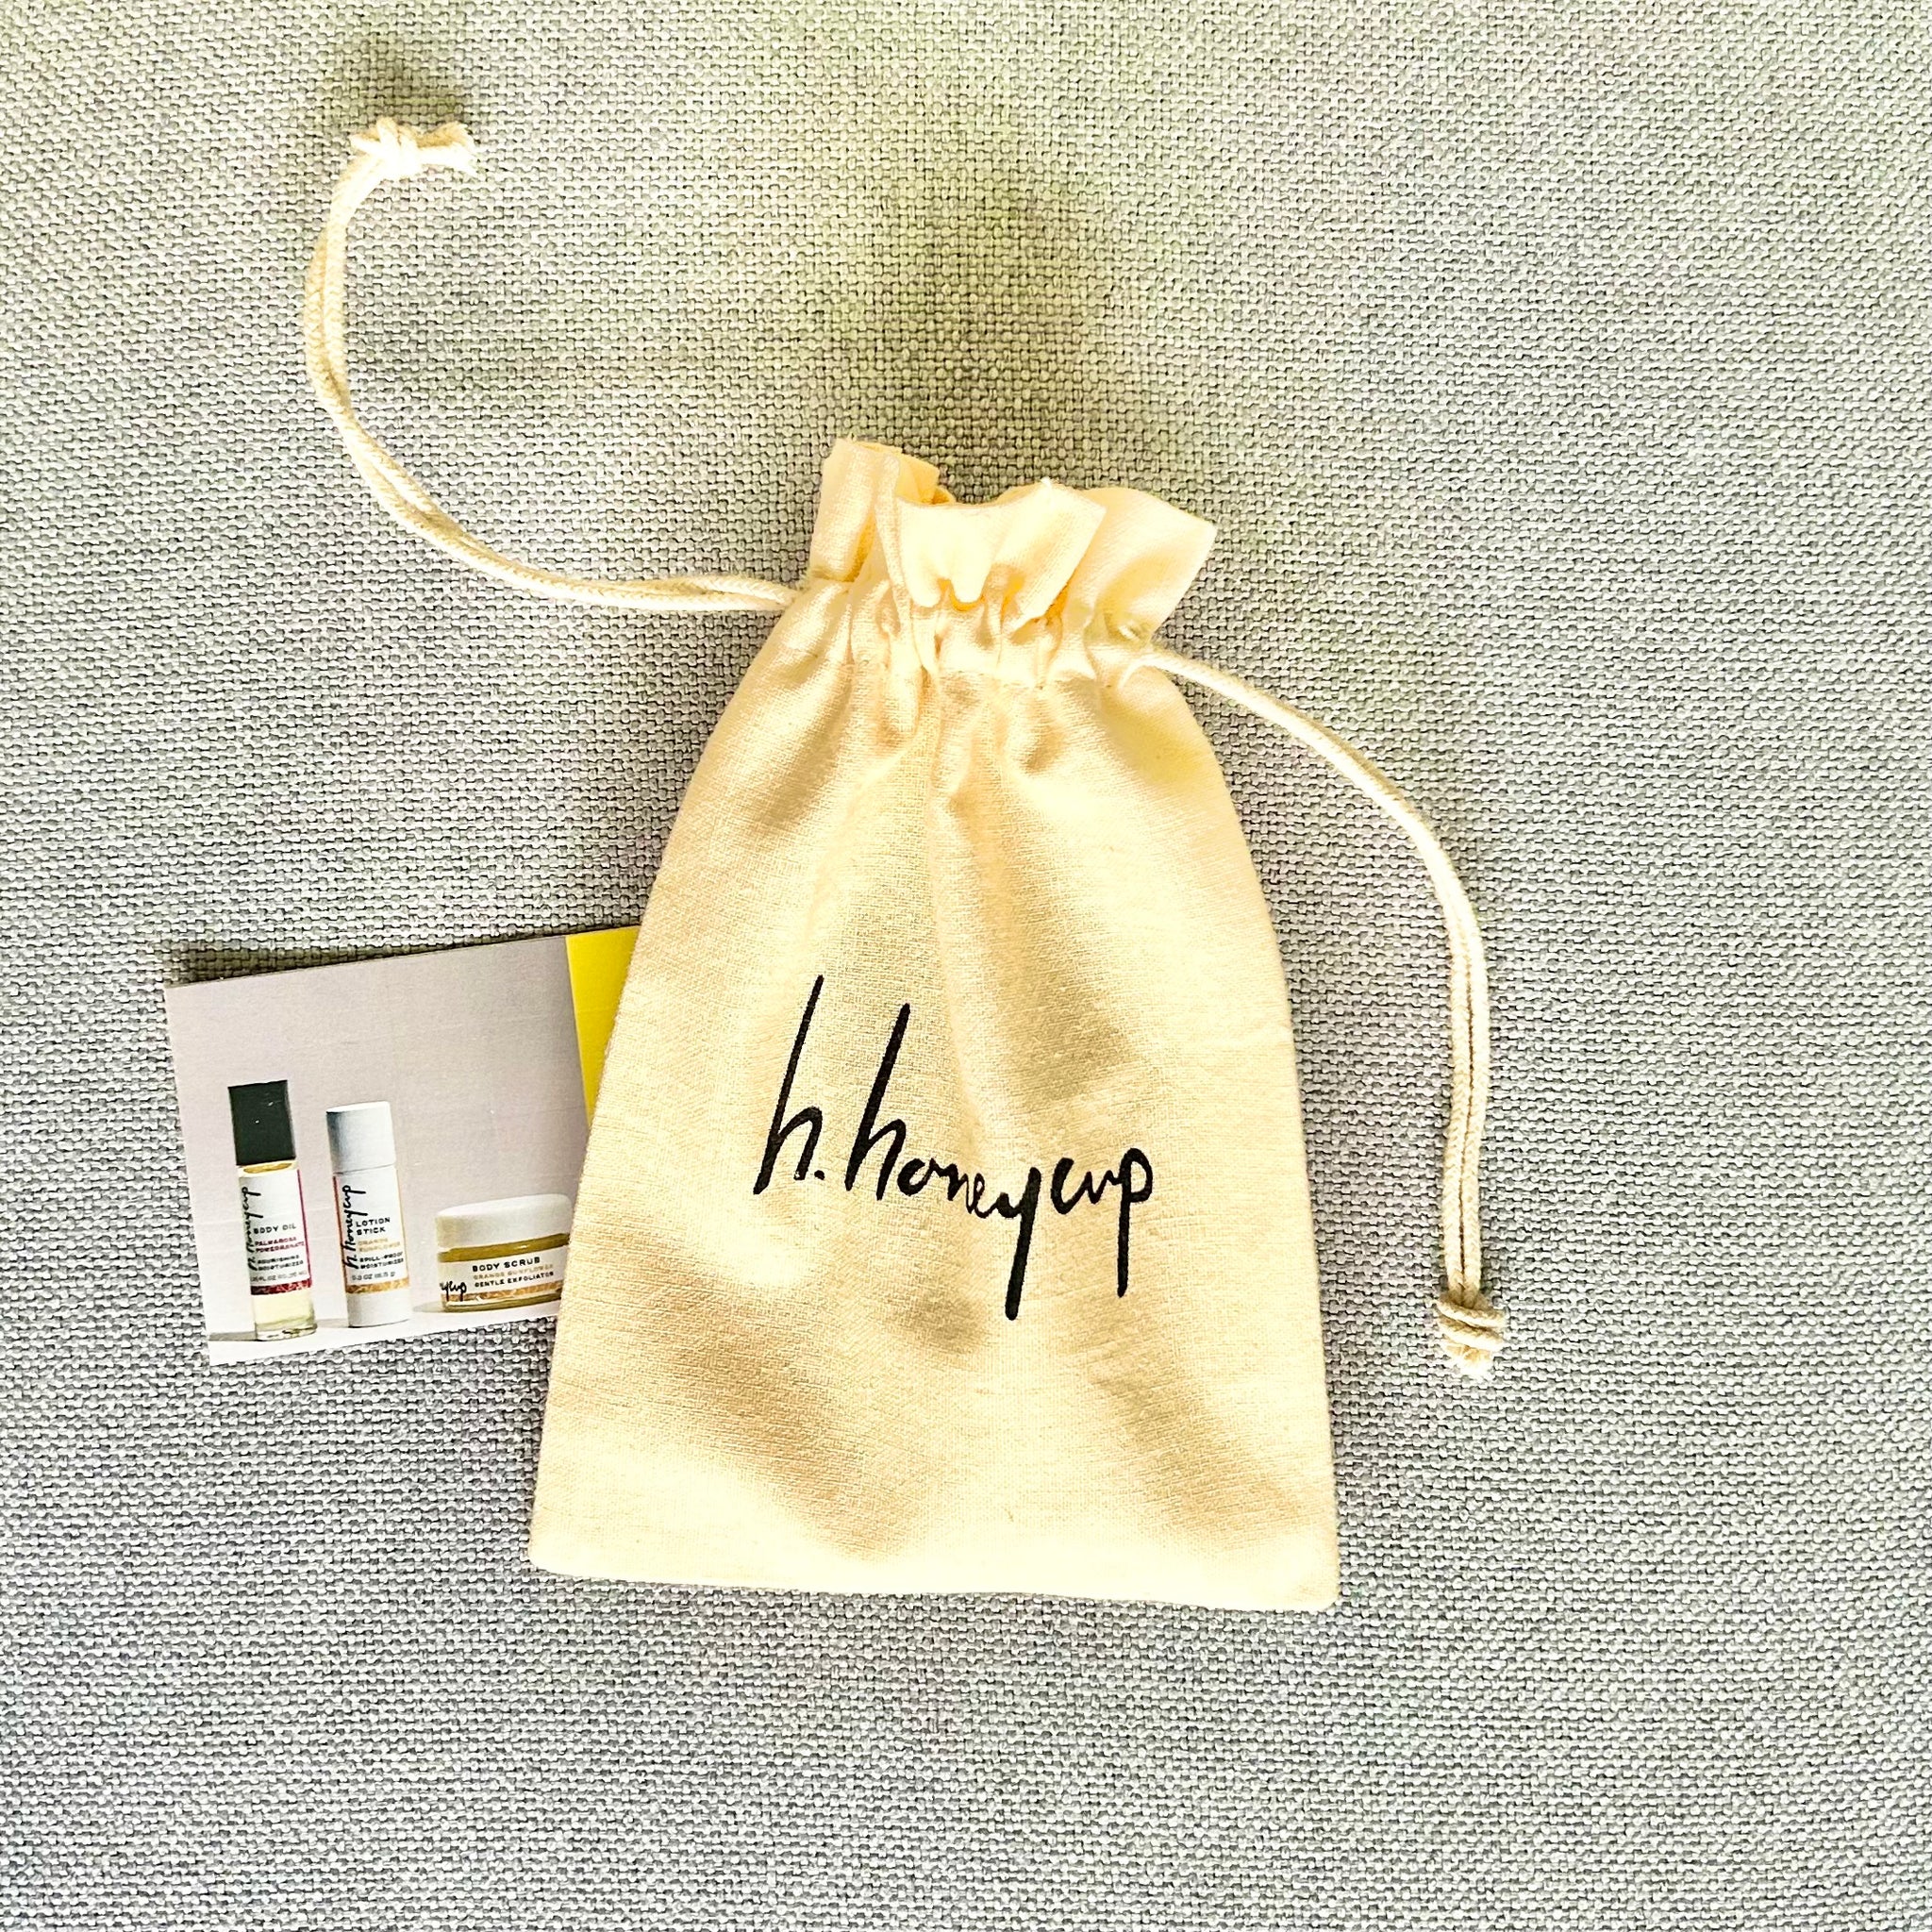 Travel bundle gift pouch